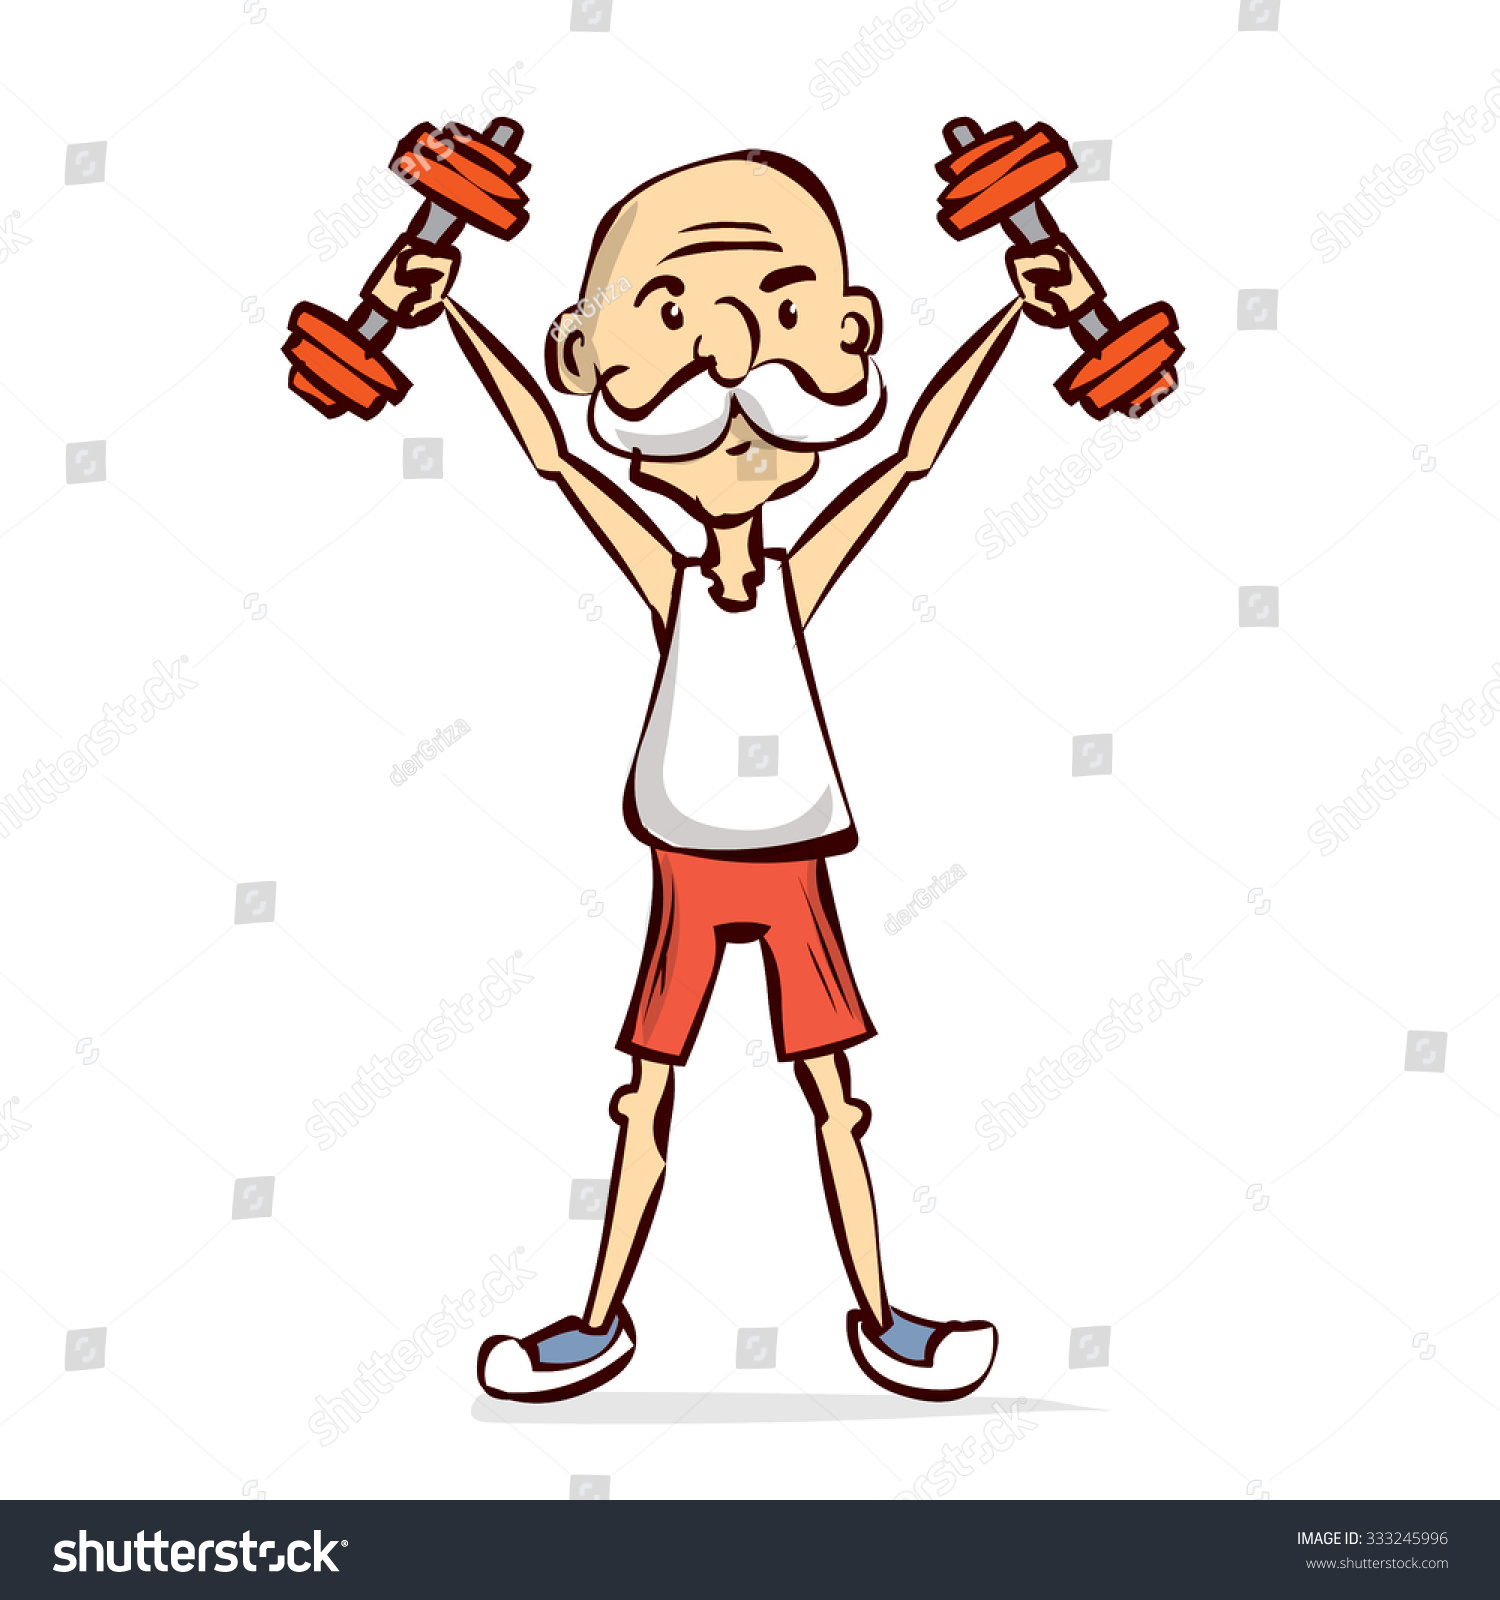 funny workout clipart - photo #19